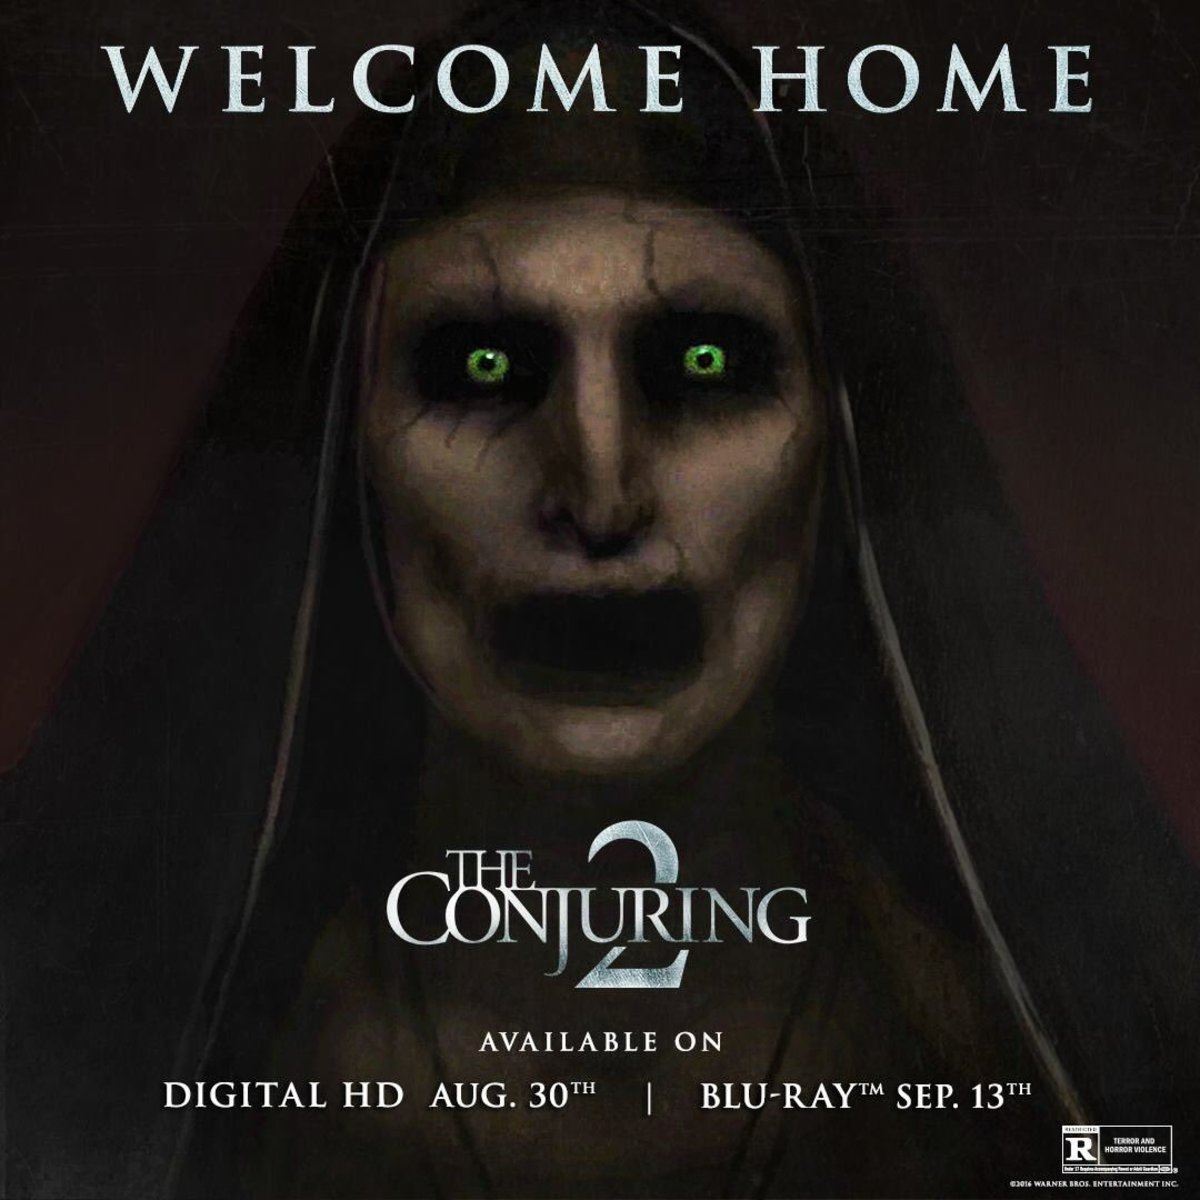 Poster for "The Conjuring 2"